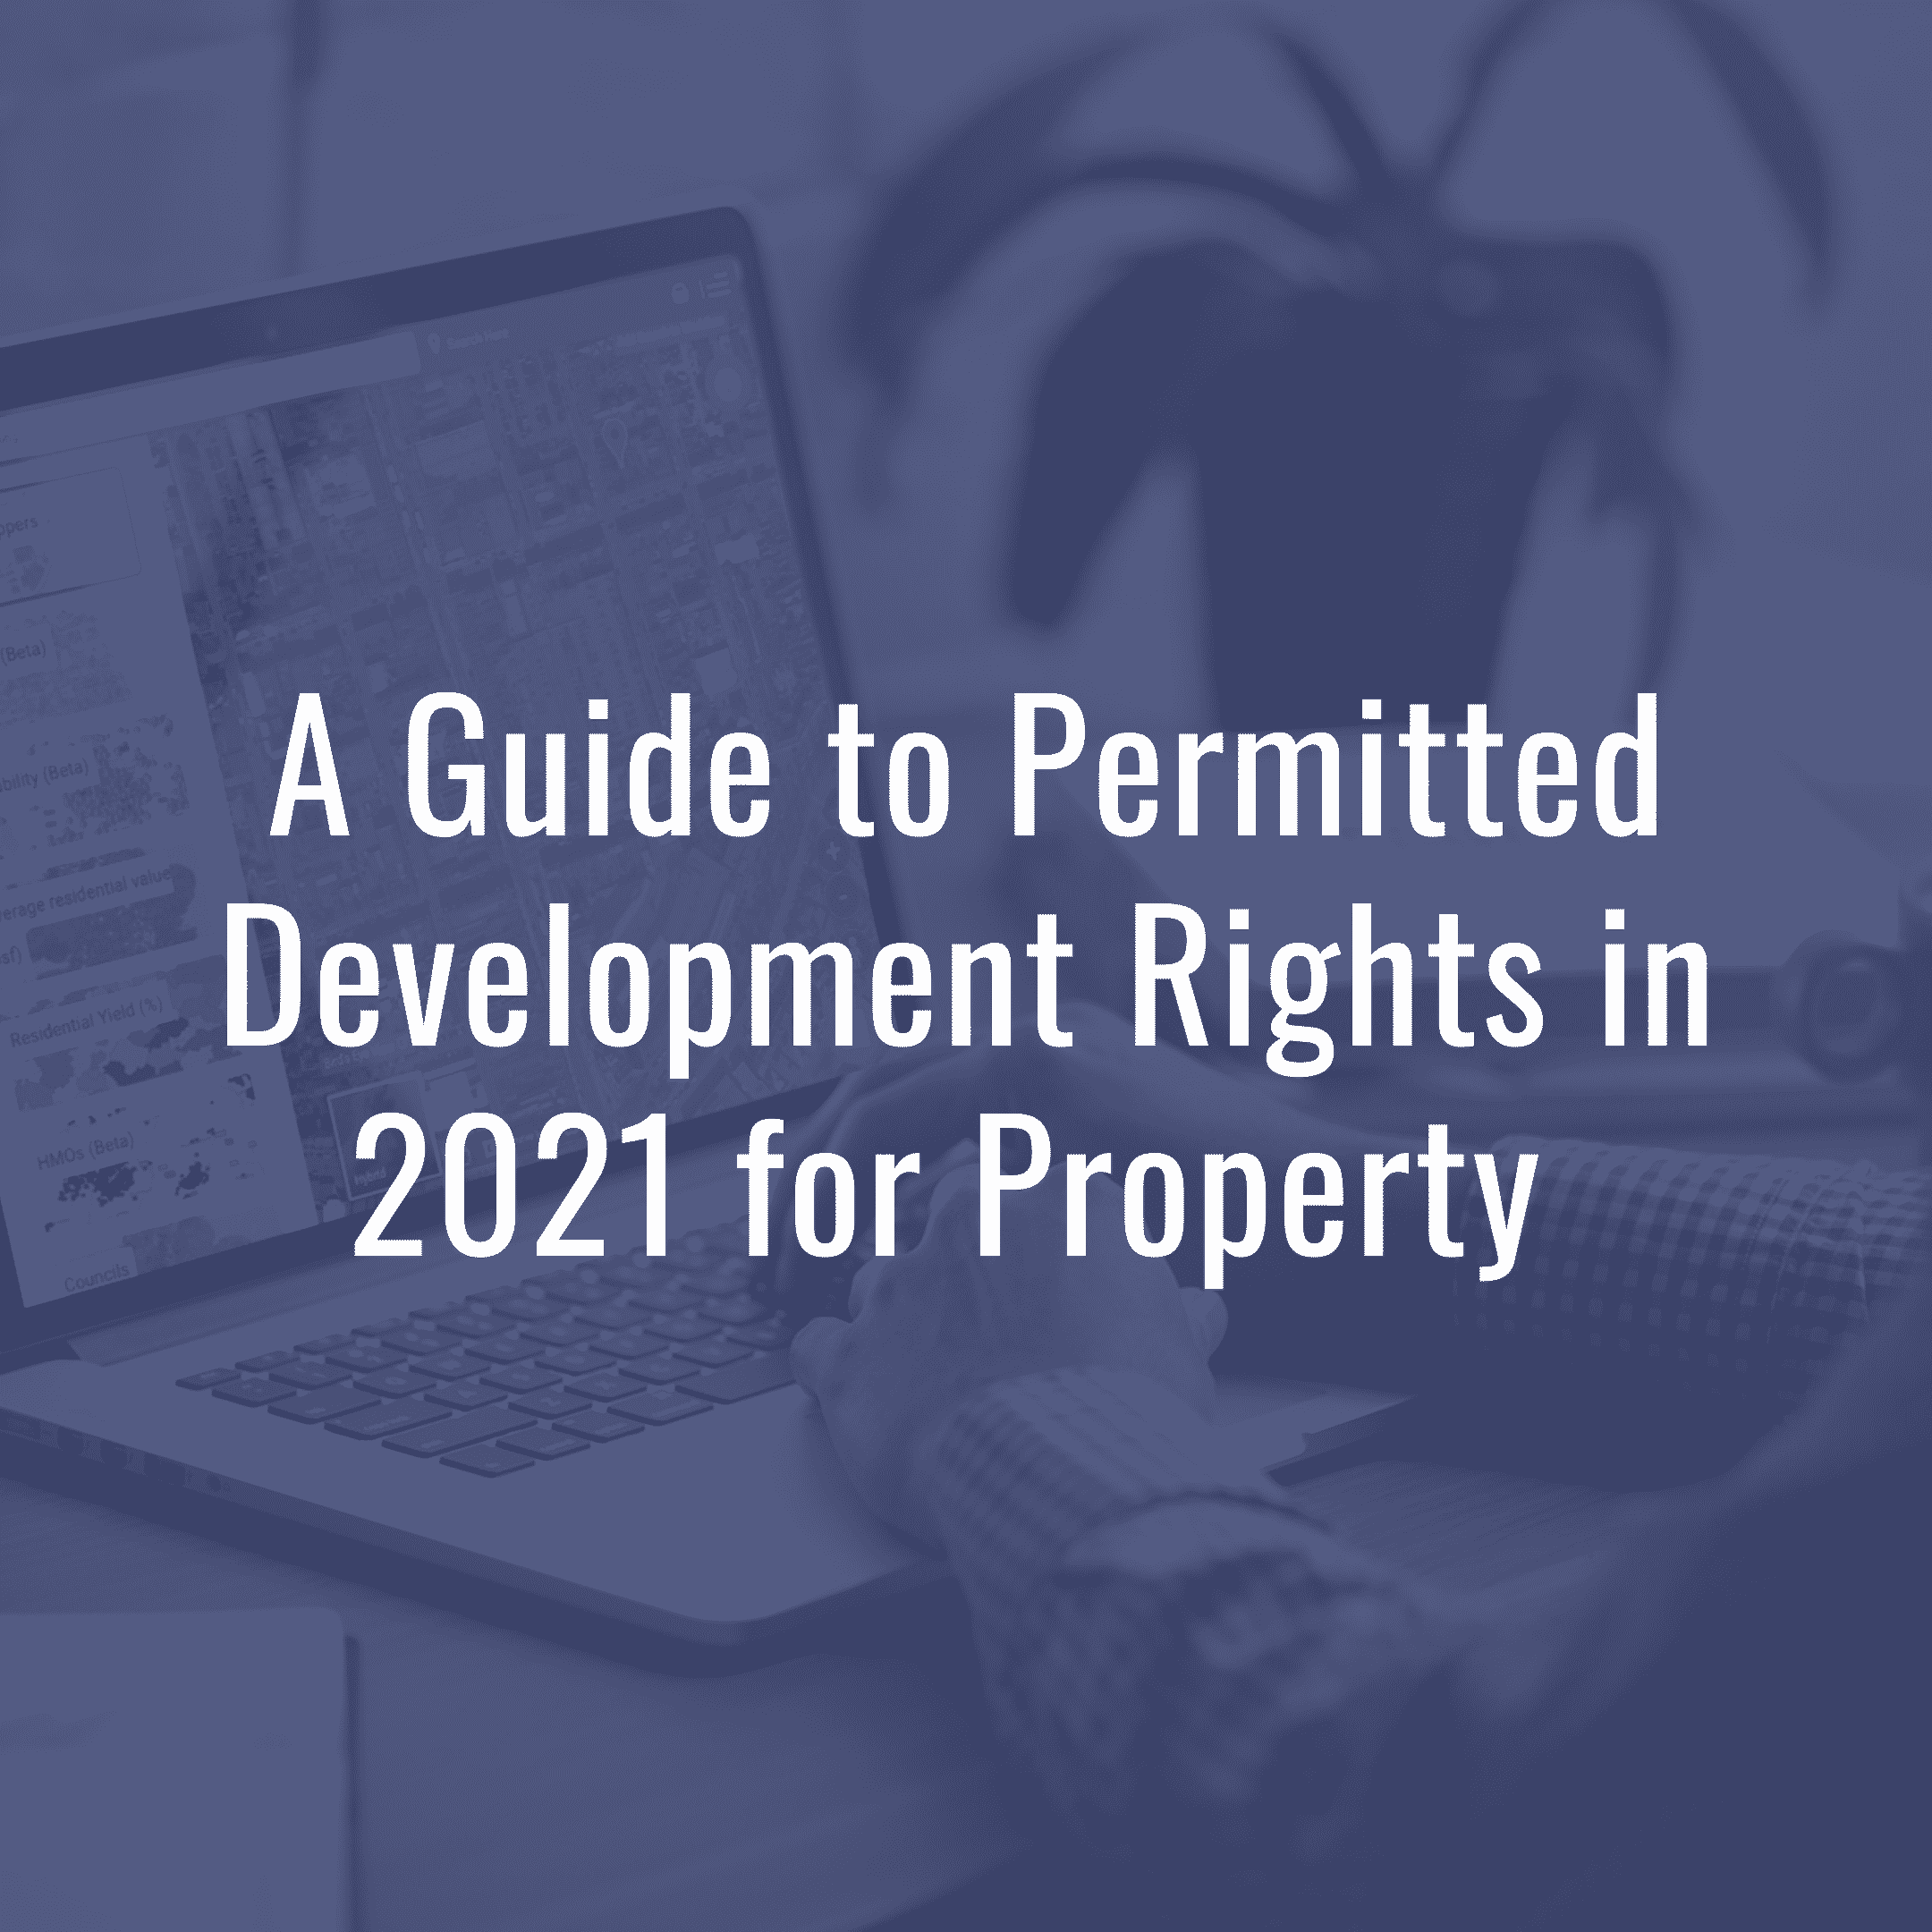 A Guide to Permitted Development Rights in 2021